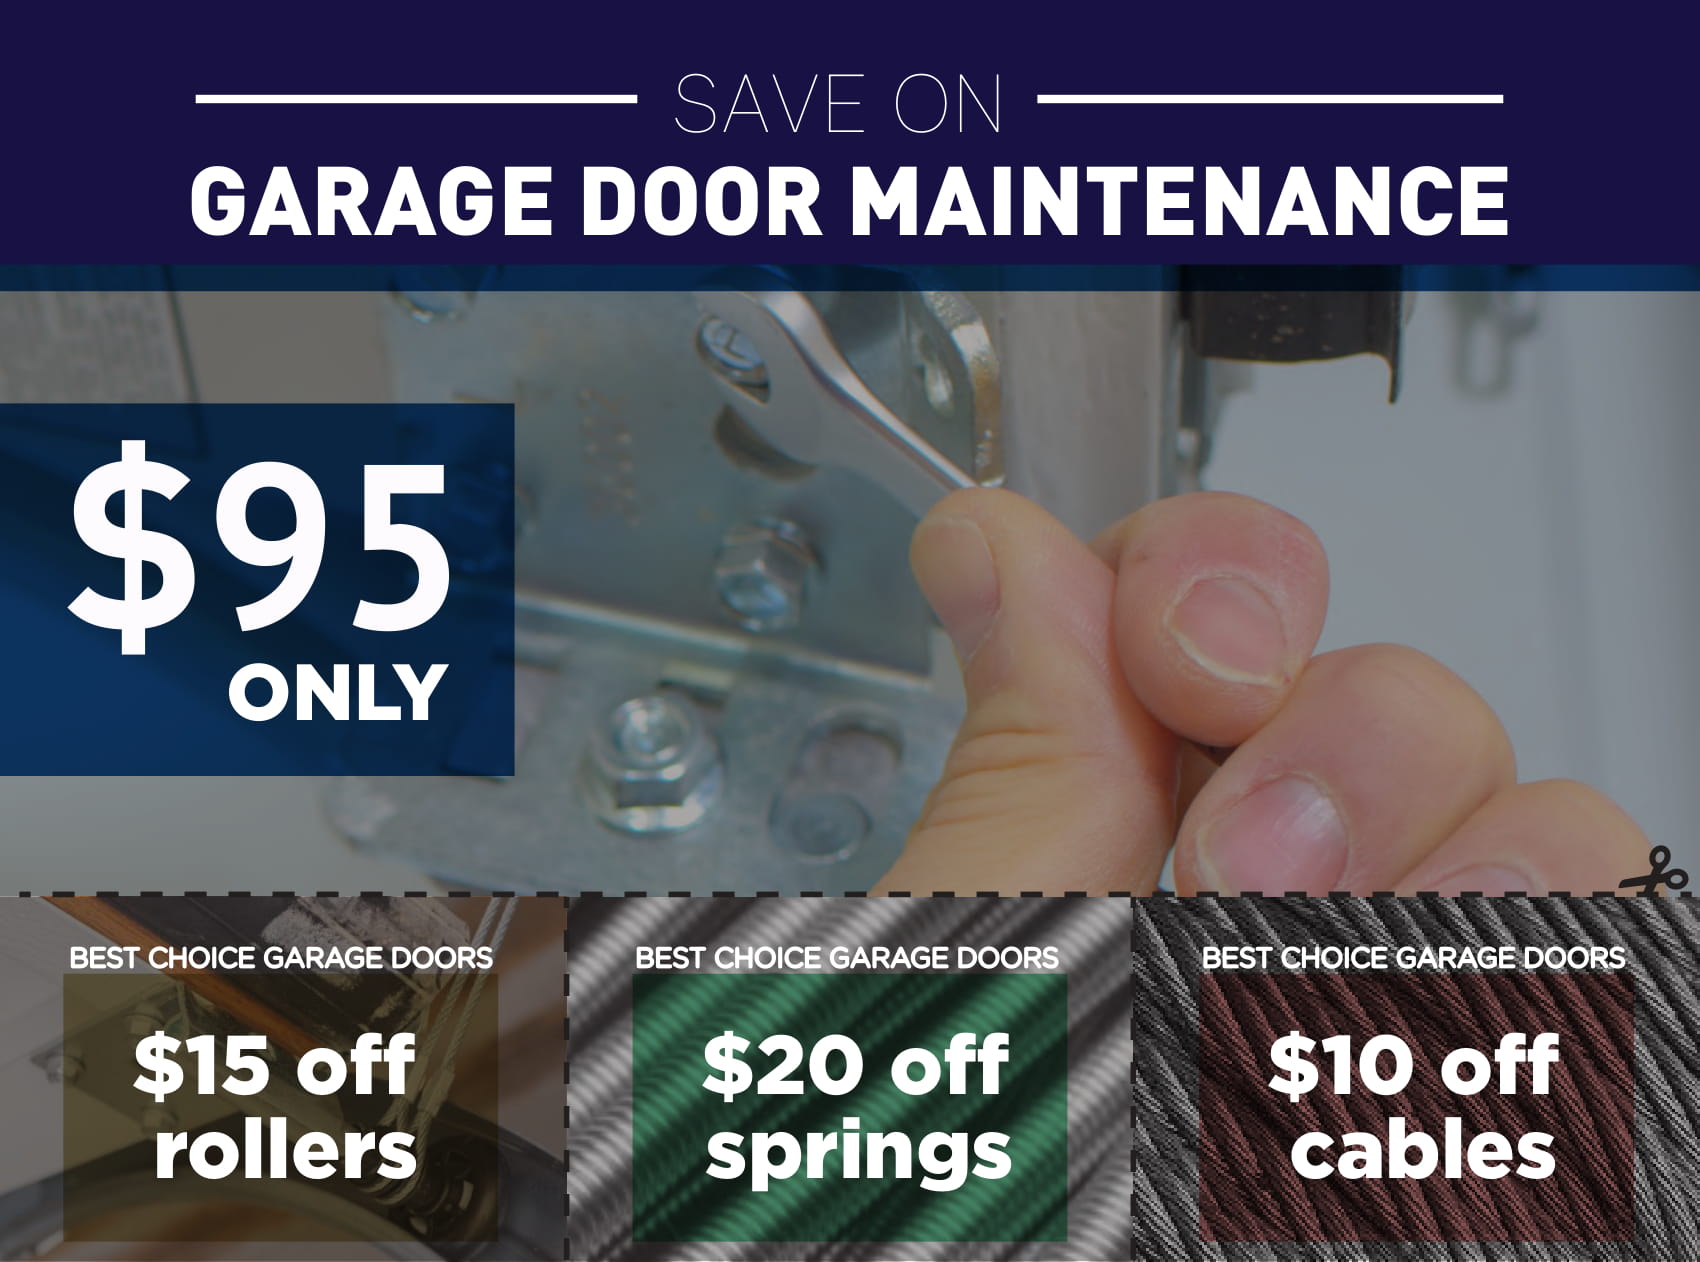 Discount offerings on garage door maintenance for rollers, springs, and cables